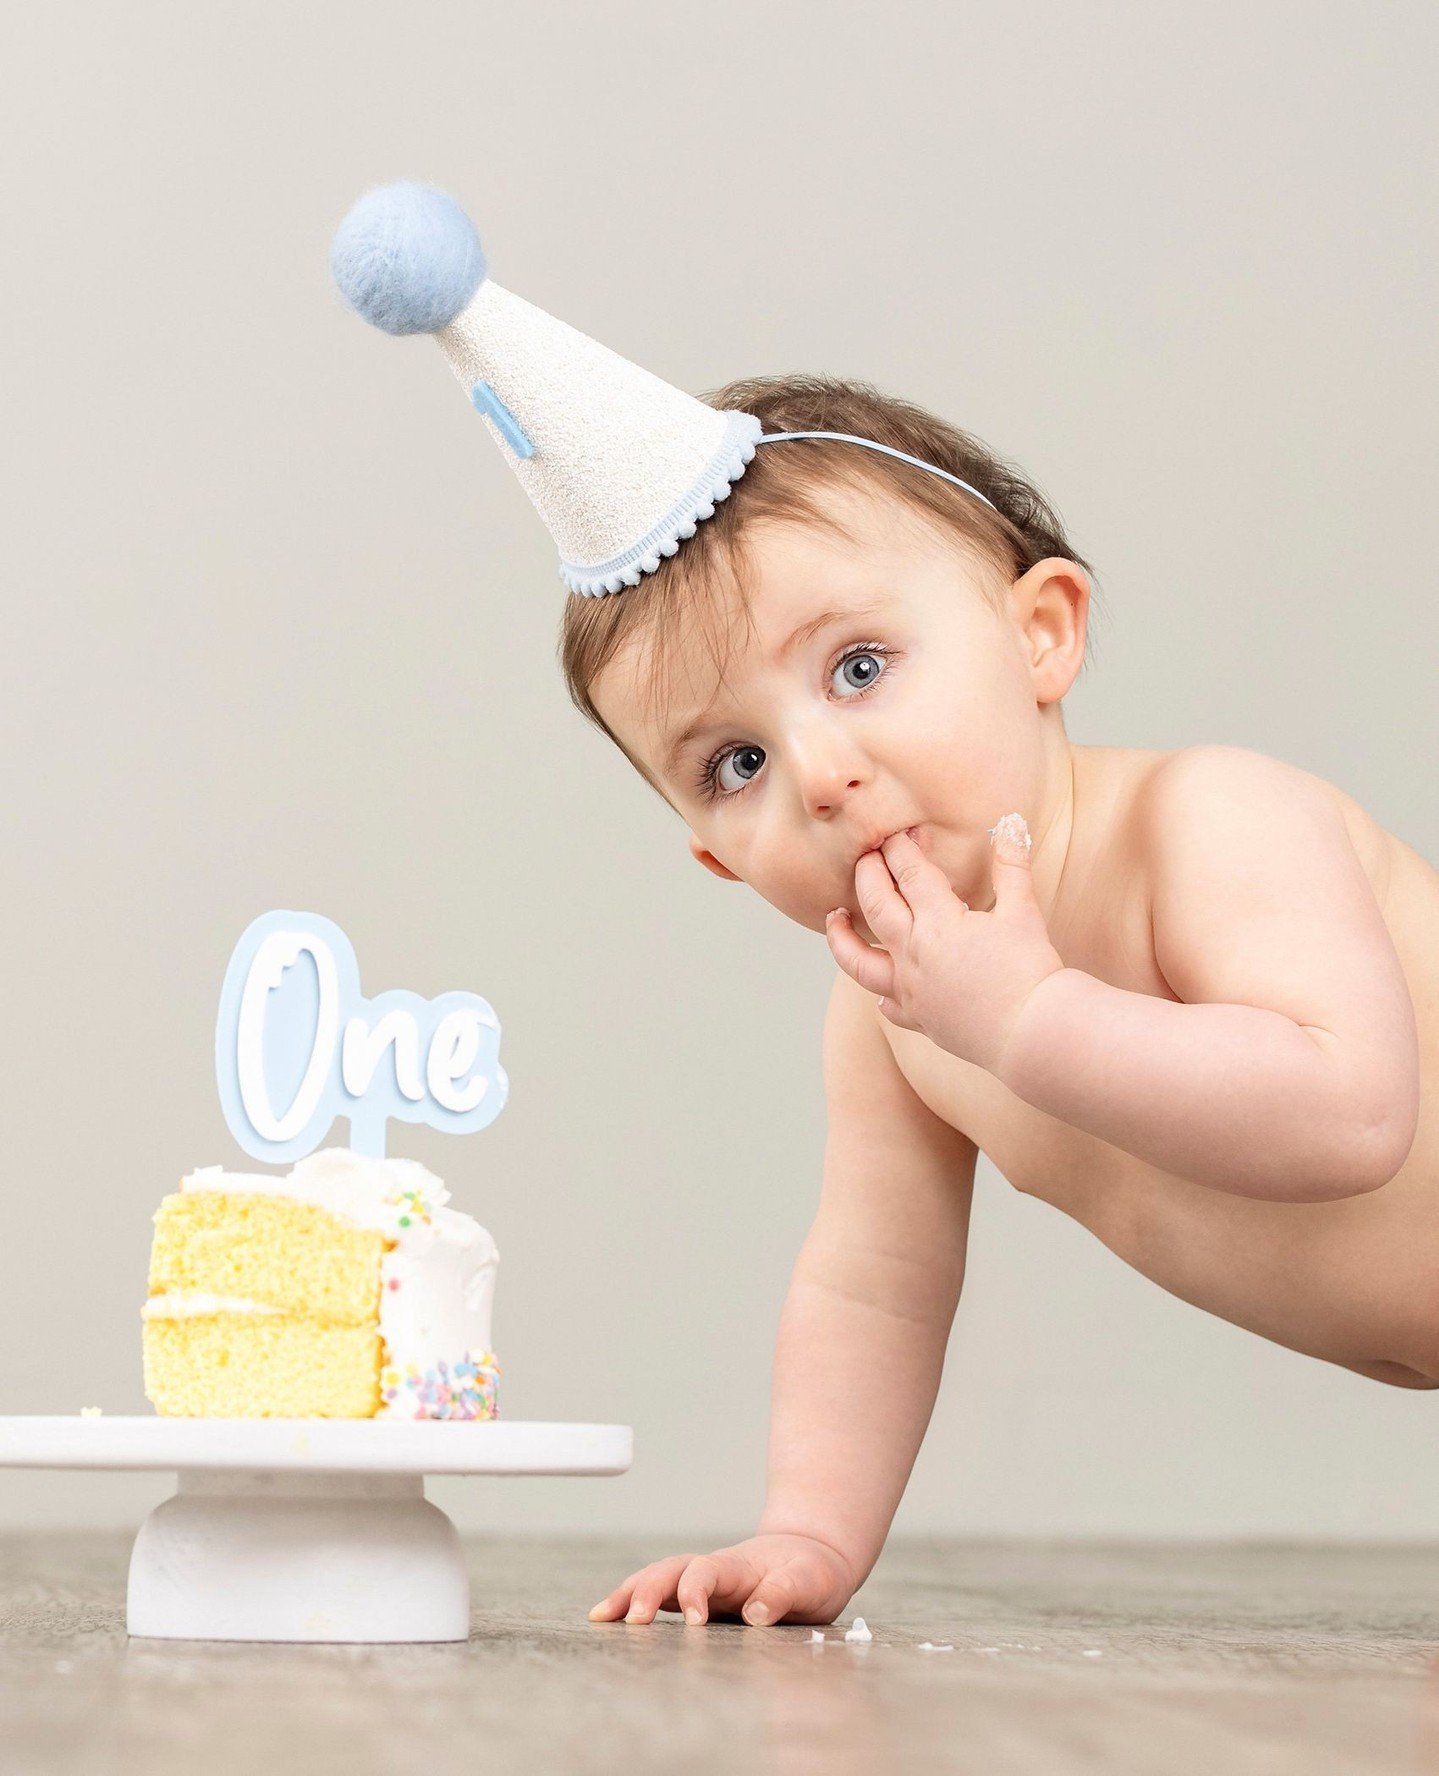 I&rsquo;m One! All eyes on the birthday King! From newborn photoshoot, to six month photoshoot, to holiday photoshoot, to their first birthday. Our photo membership offers a year's worth of memories to cherish and share. Want to know more? Visit the 